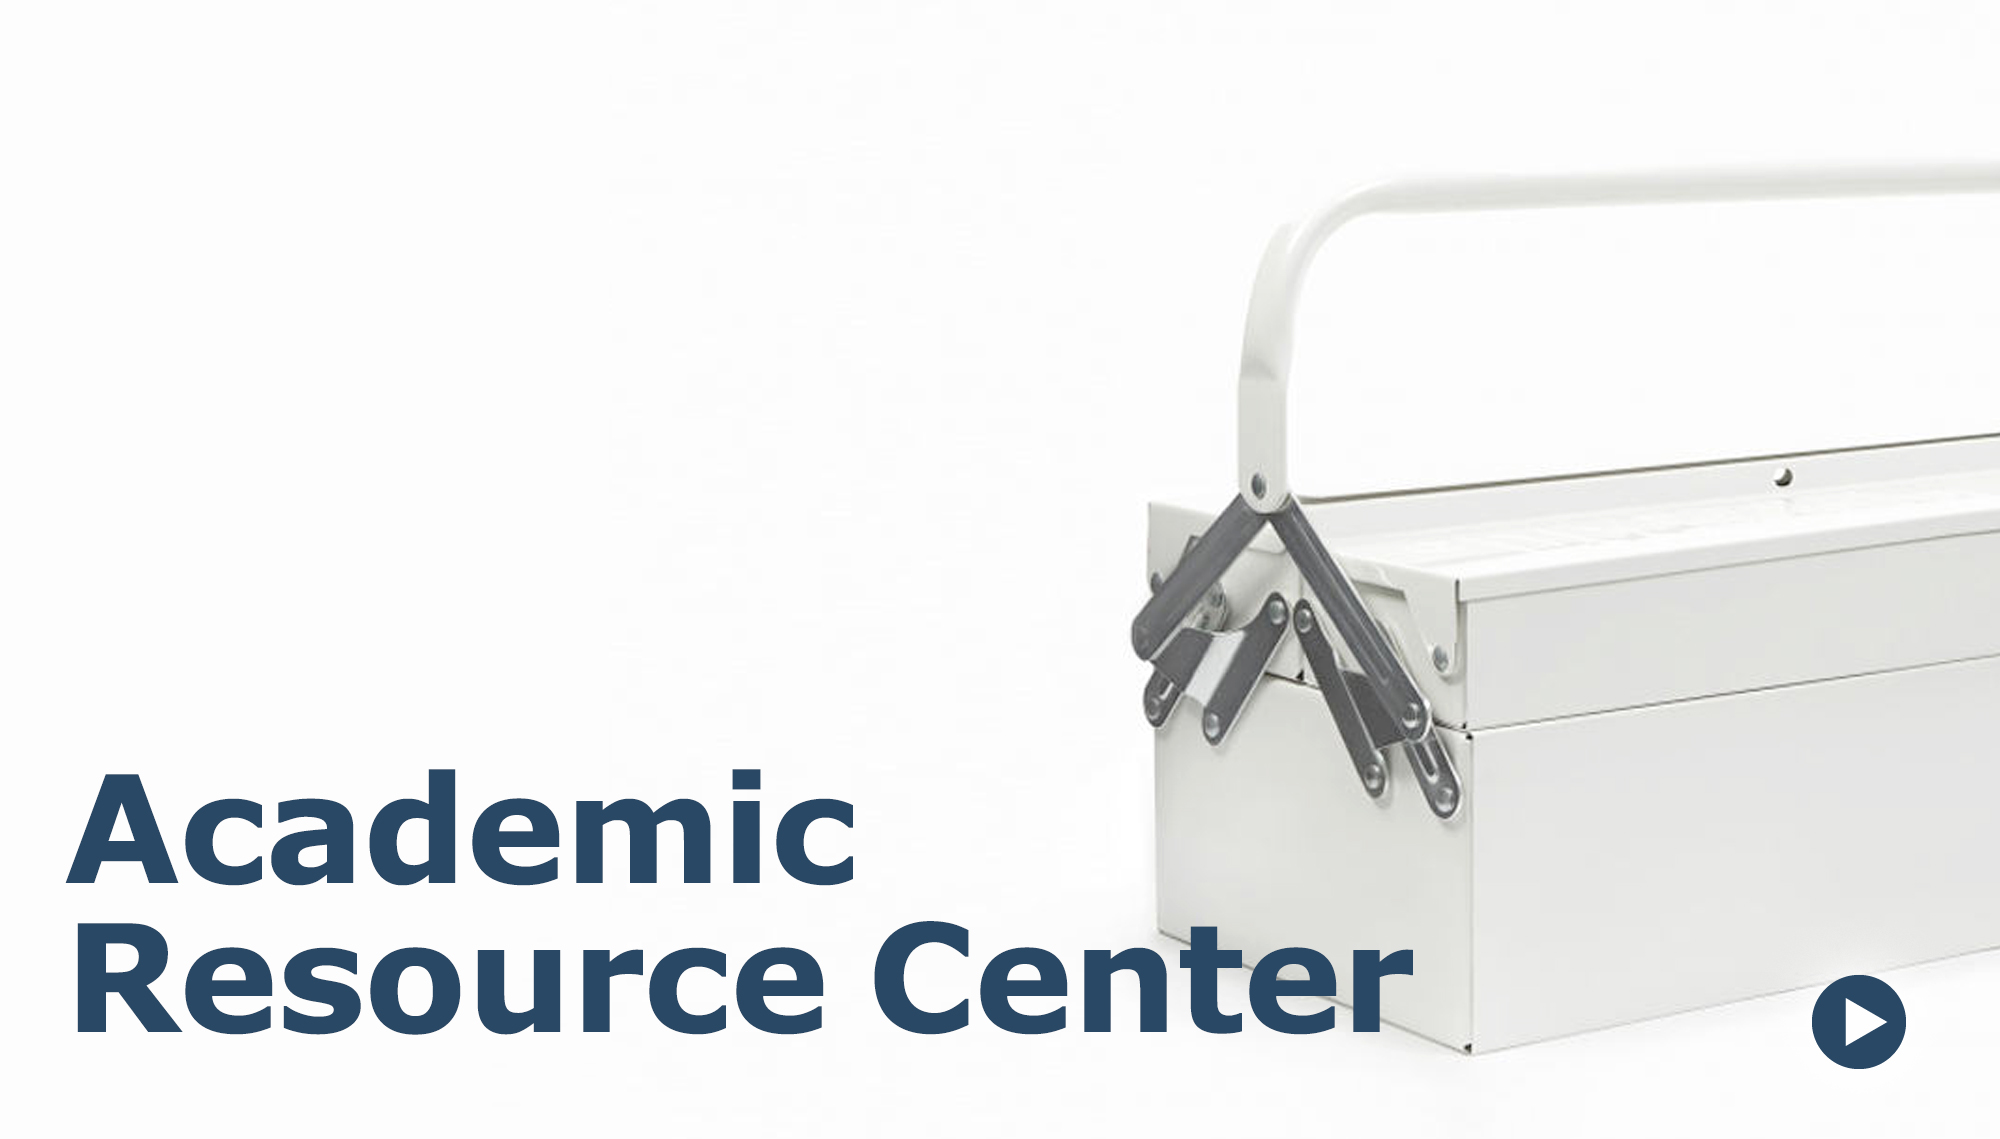 Link to Acacemic Resource Center